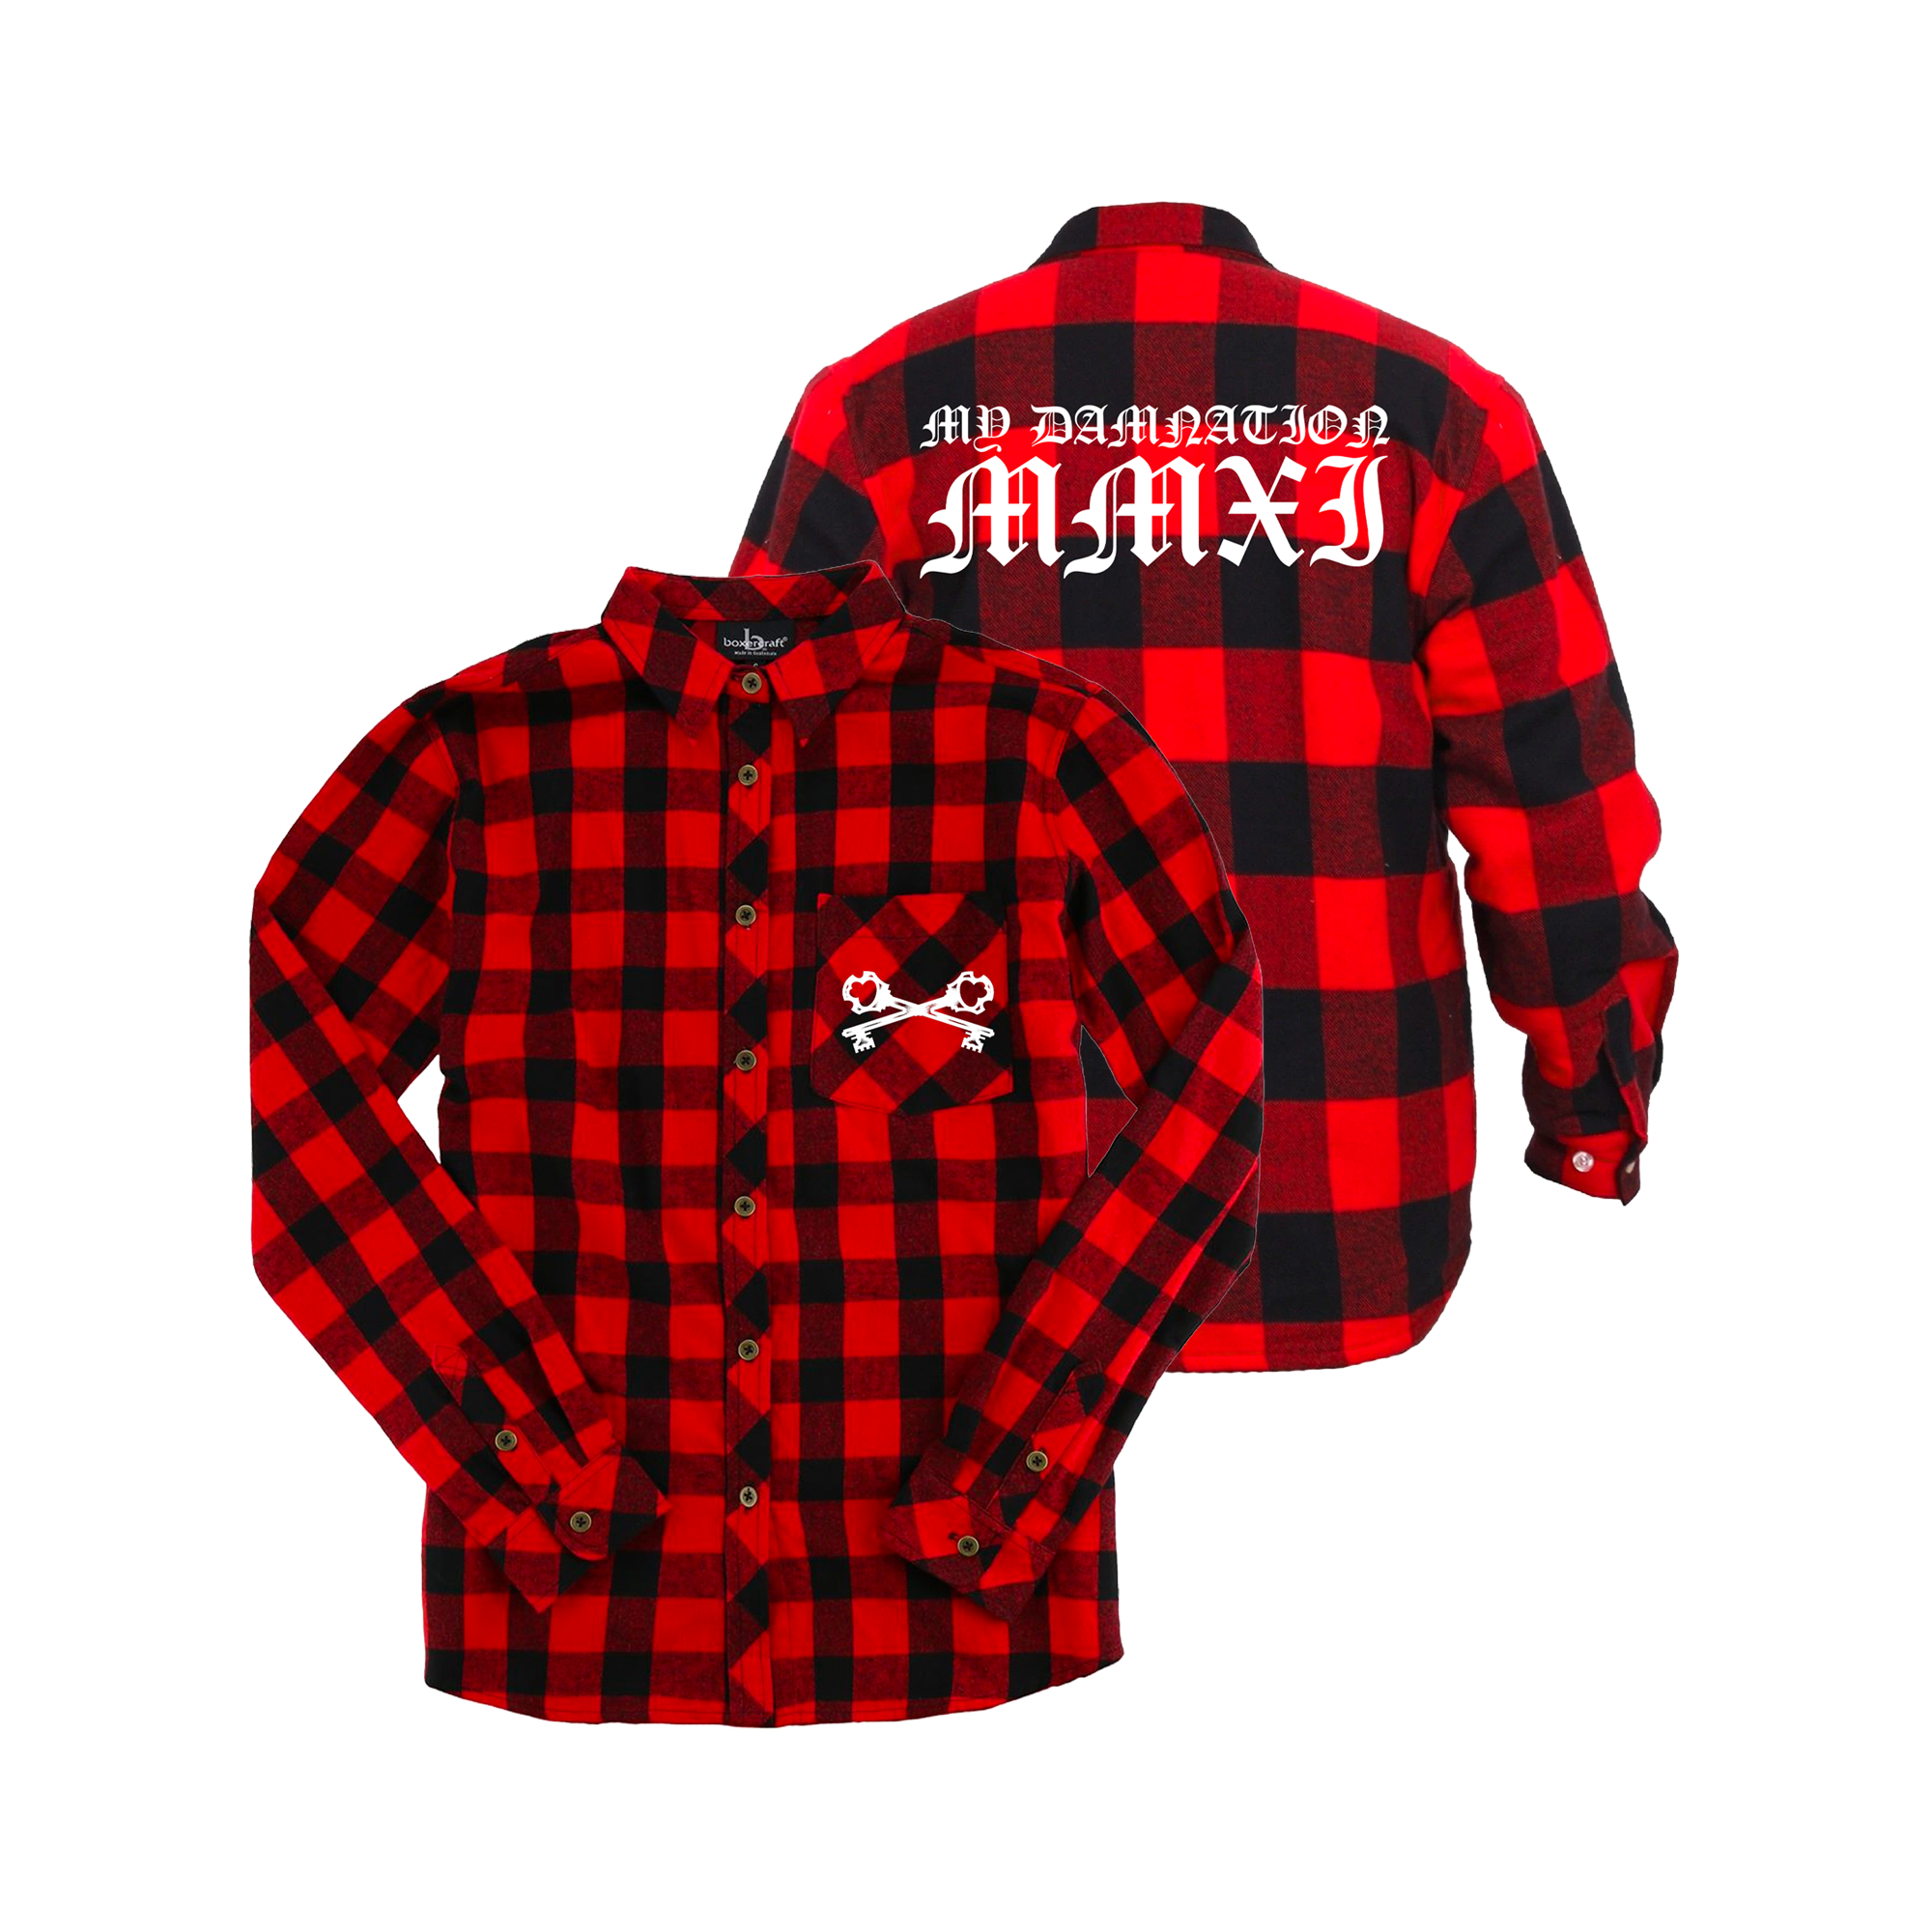 Chelsea Grin - My Damnation Flannel